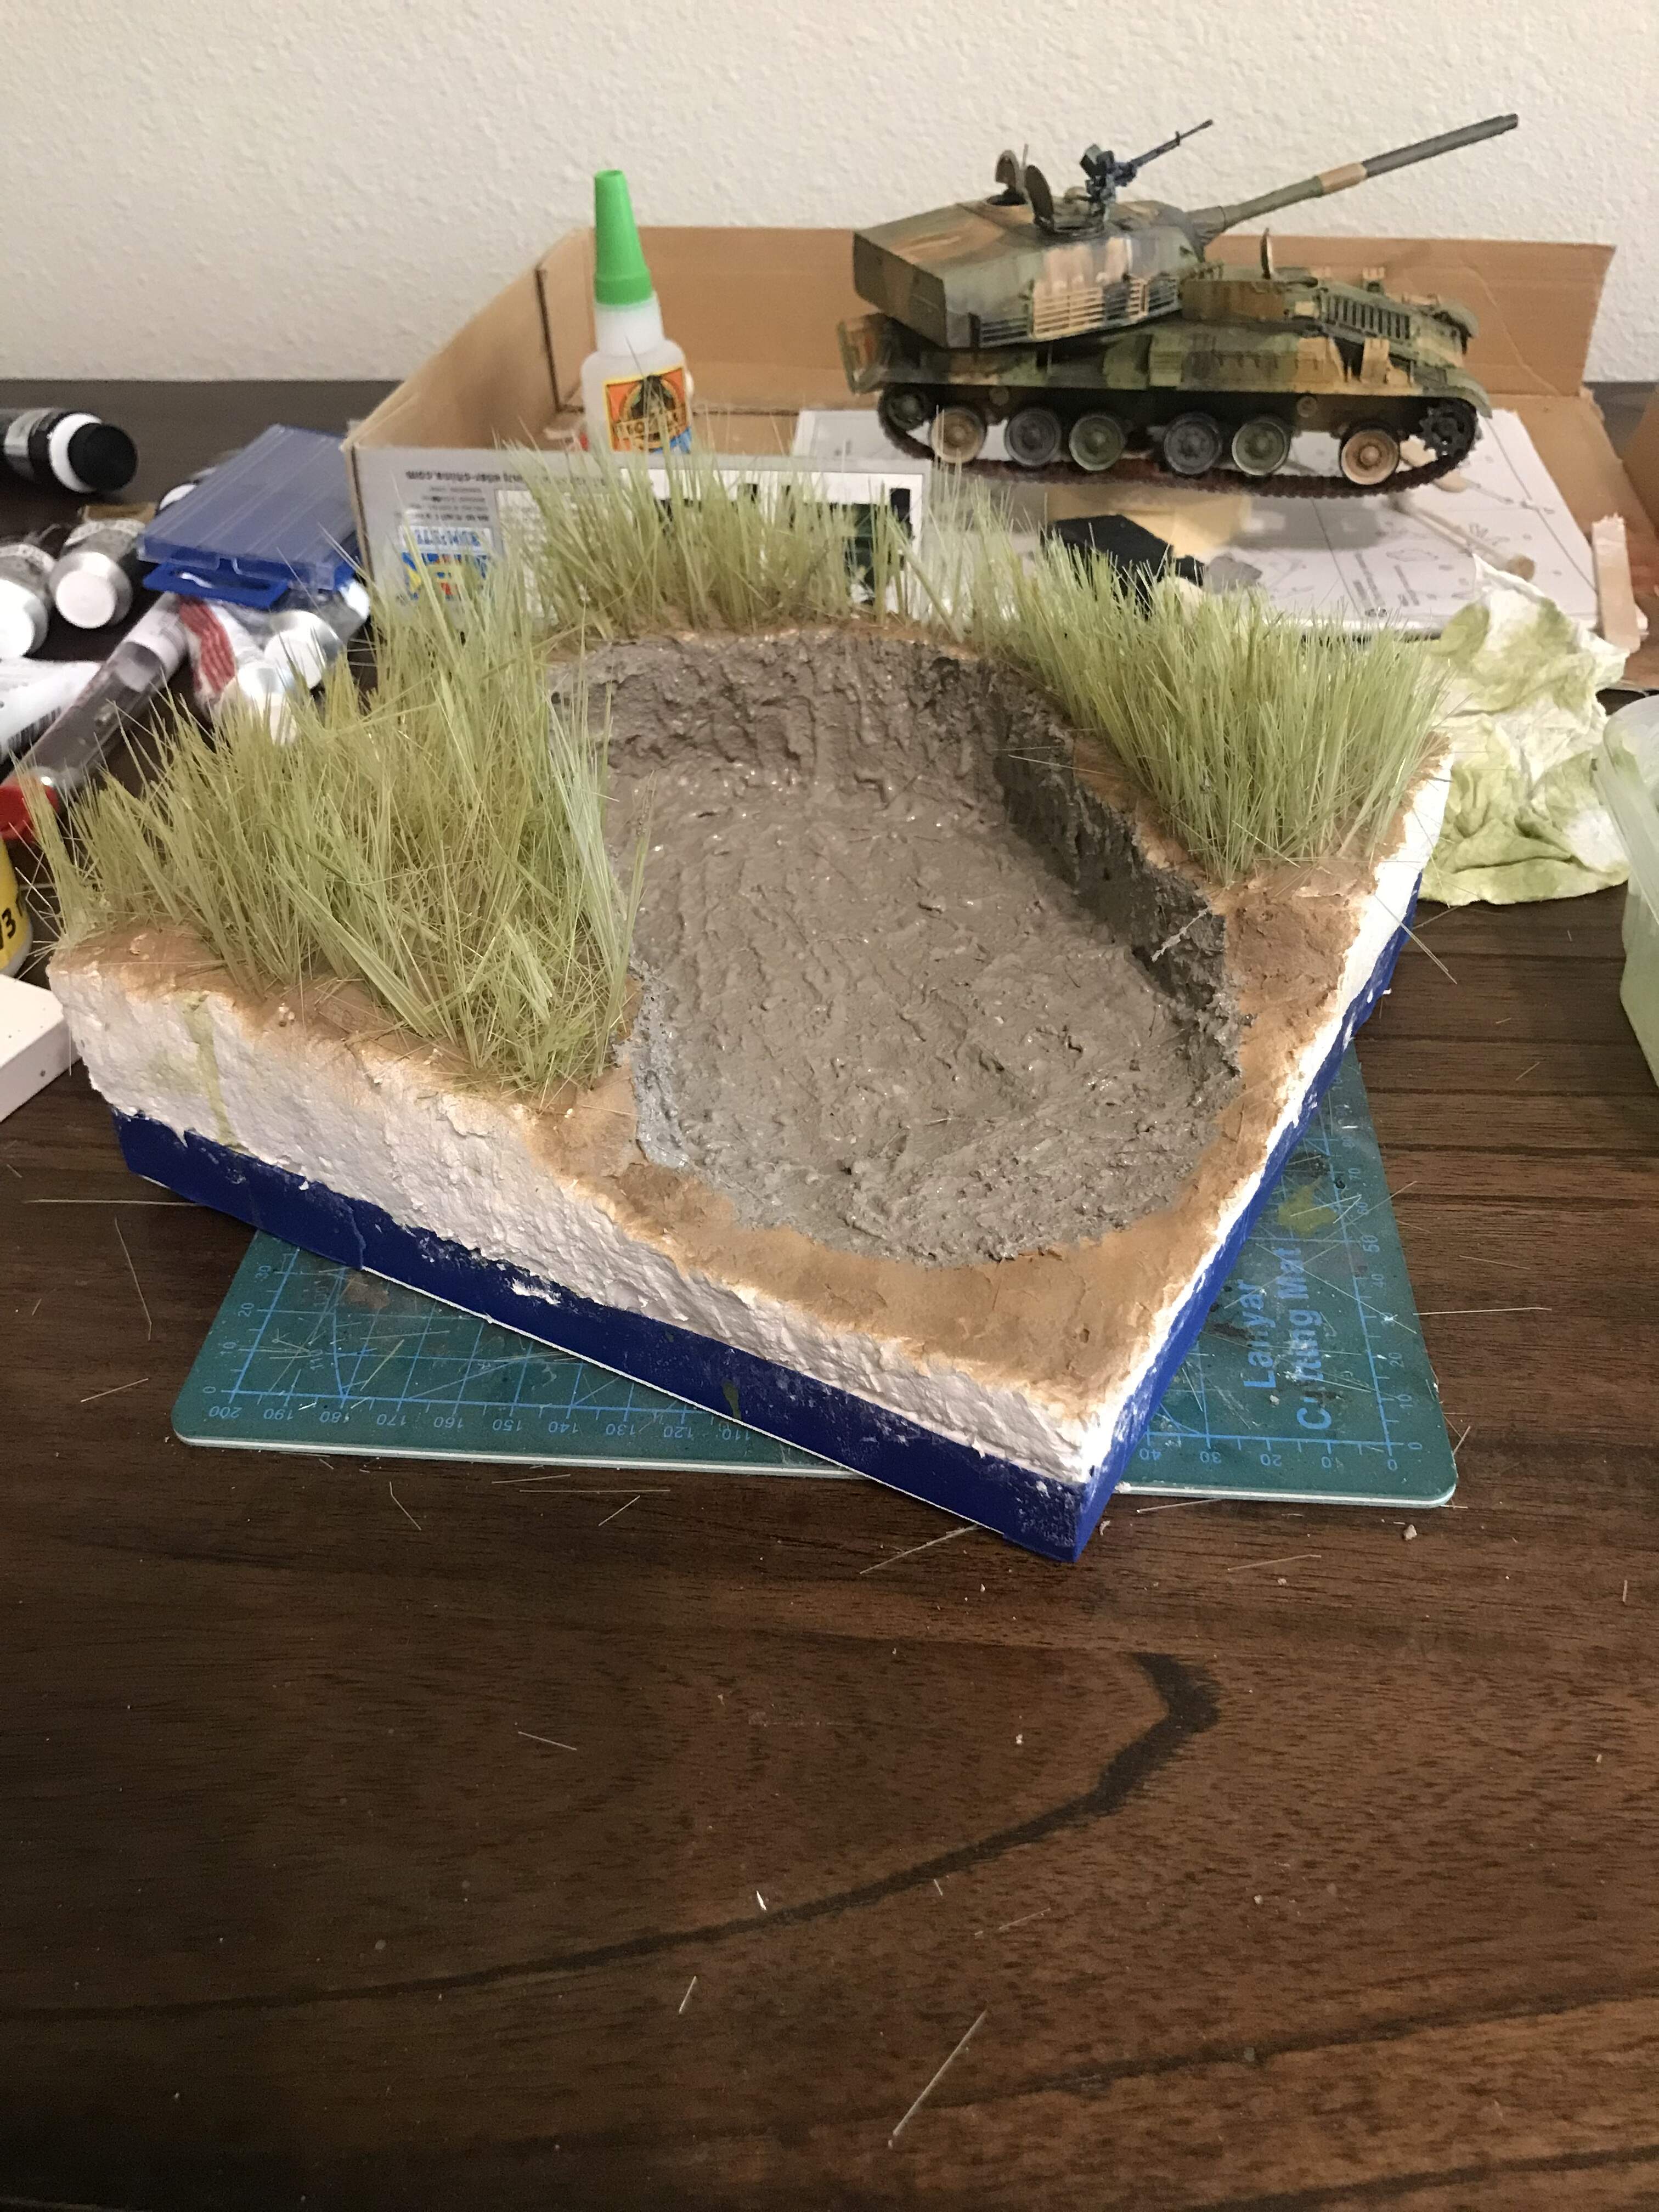 Hull defilade with tall grass diorama - Armor/AFV - KitMaker Network